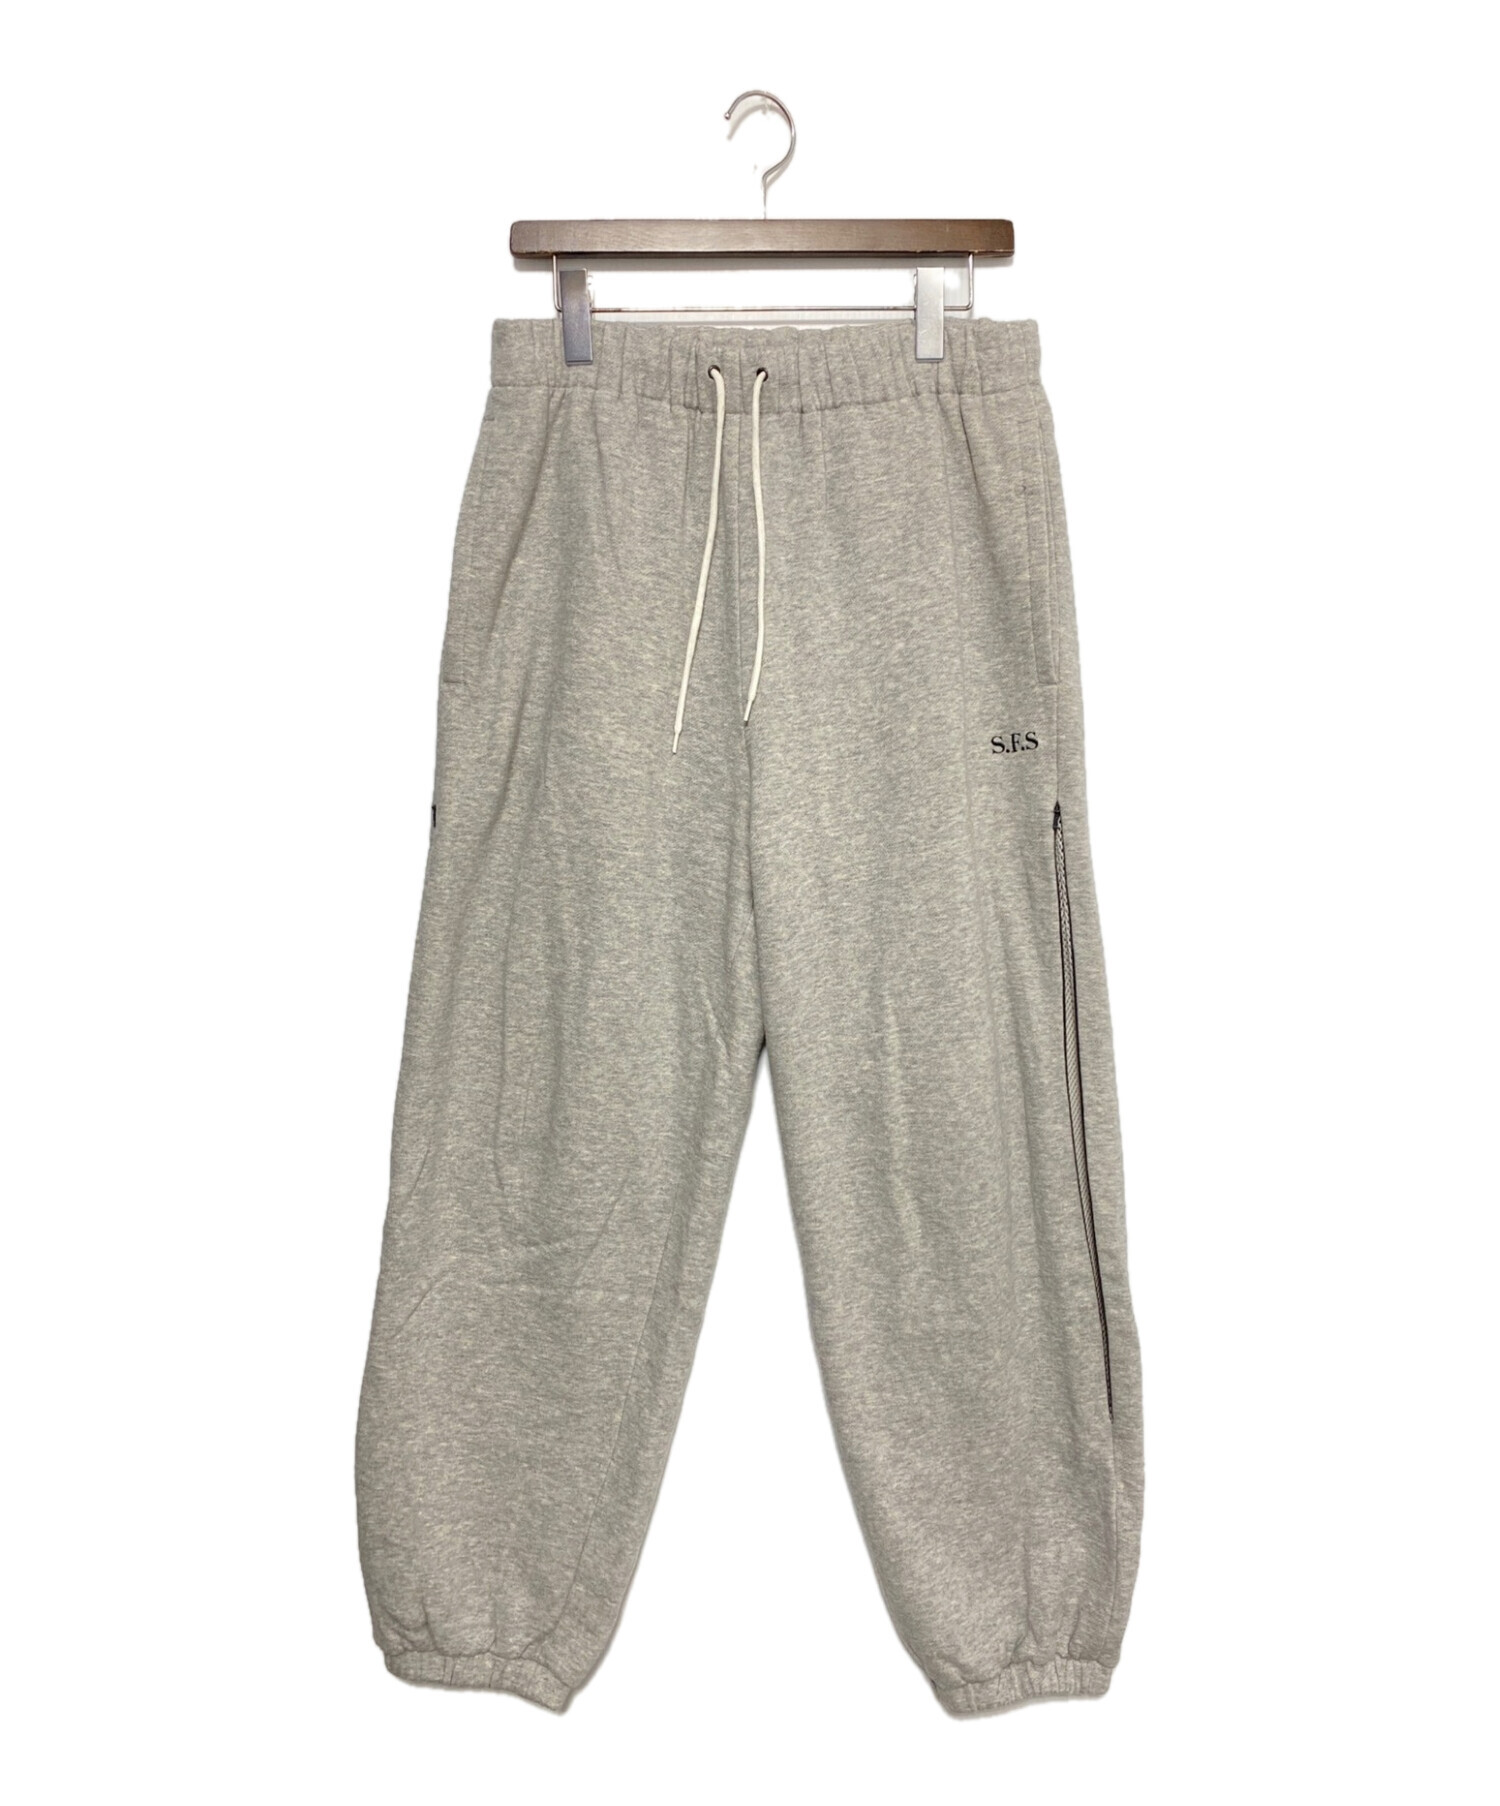 Private brand by S.F.S  Sweat Pants